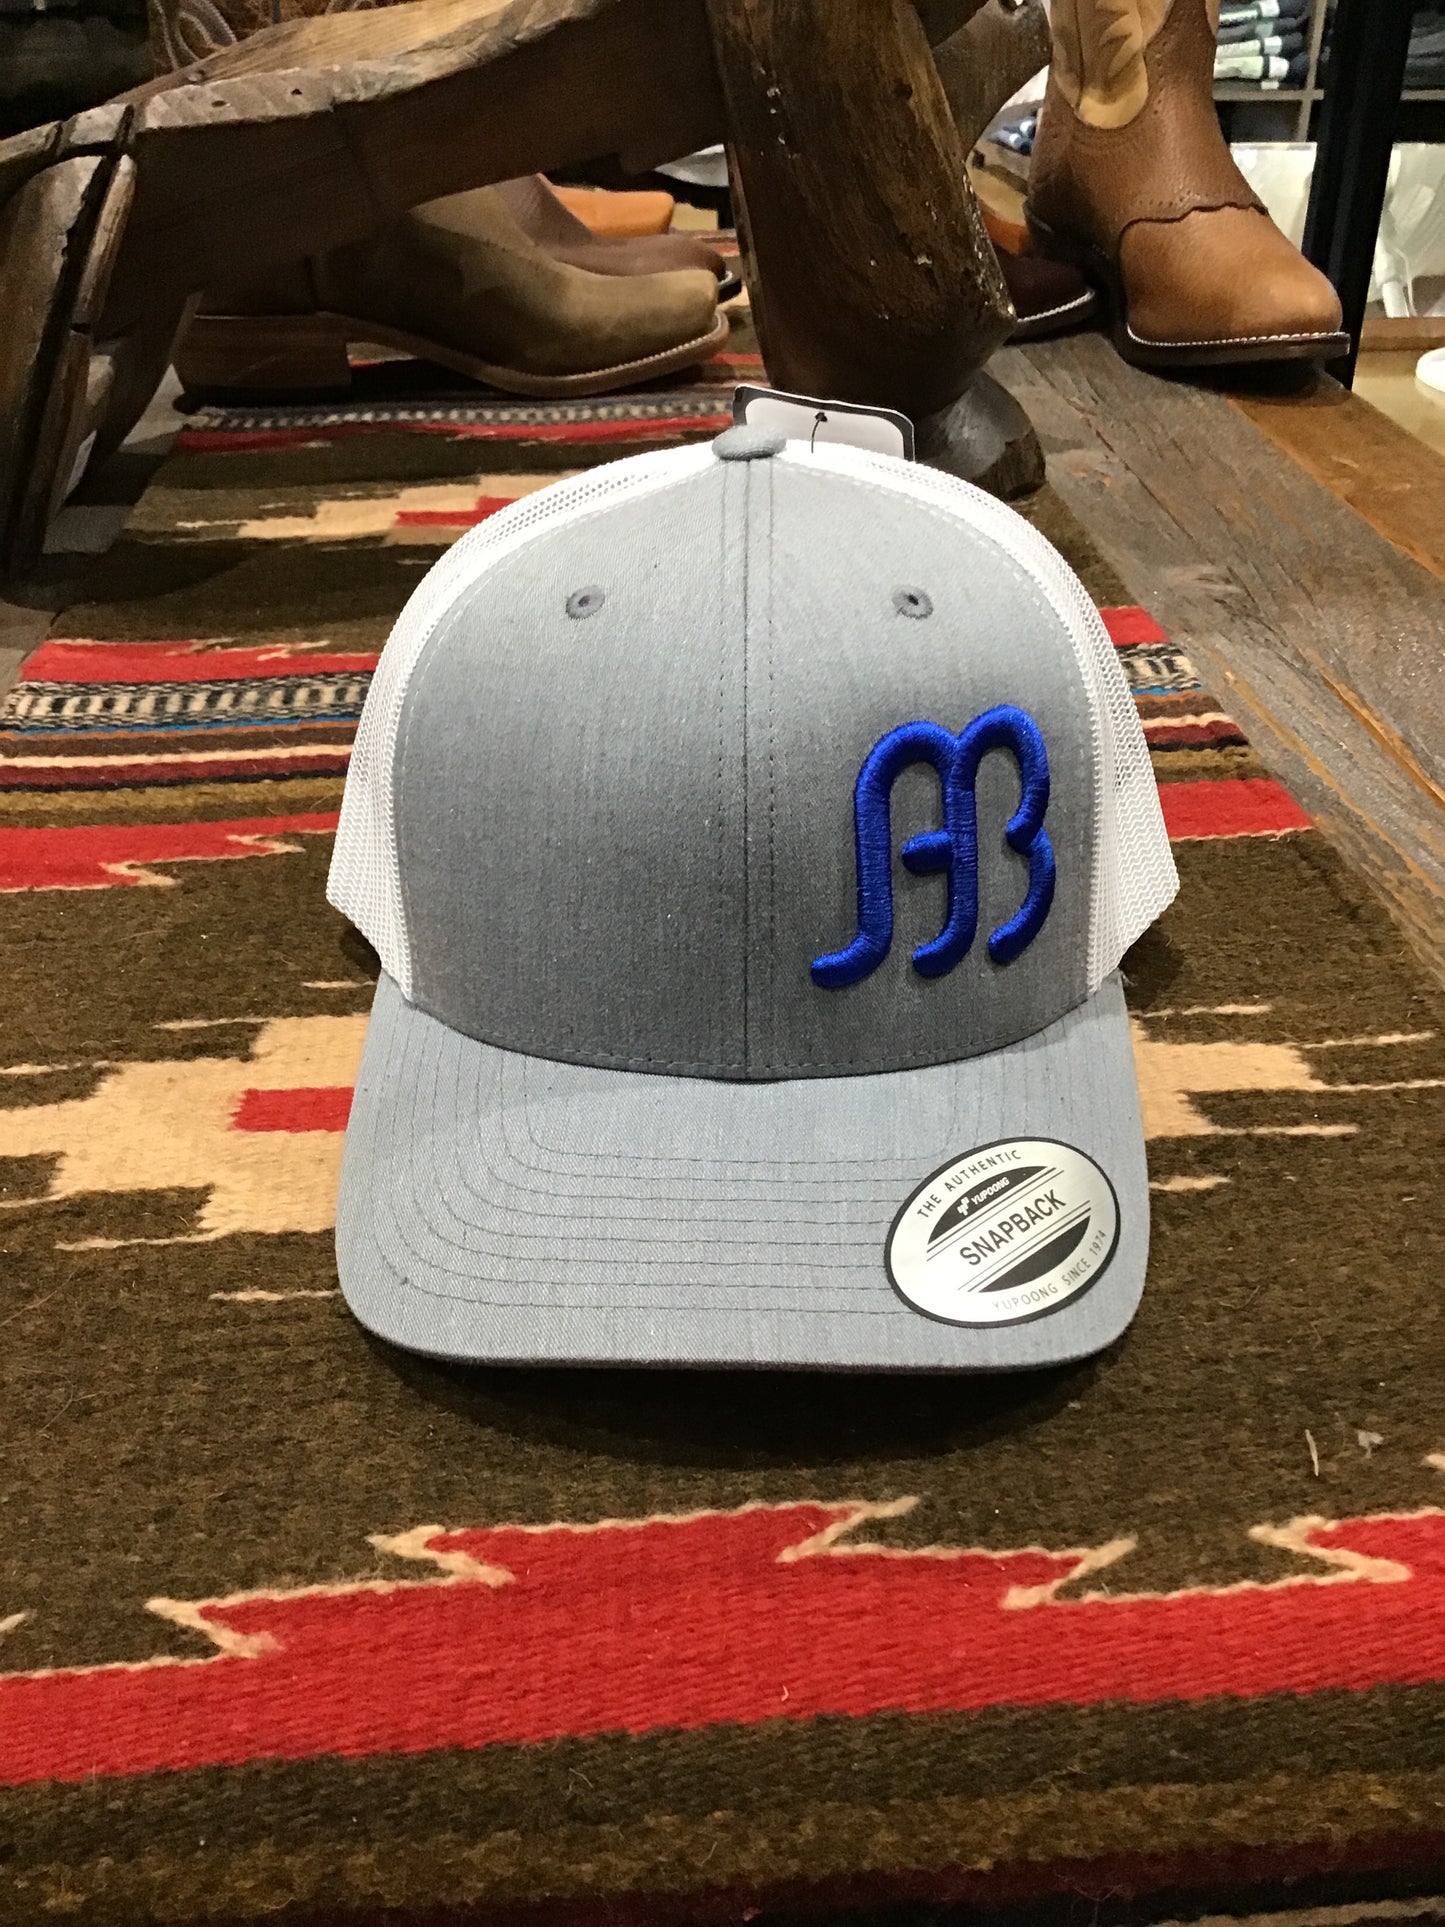 RED DIRT HAT COMPANY “ANDERSON BEAN”